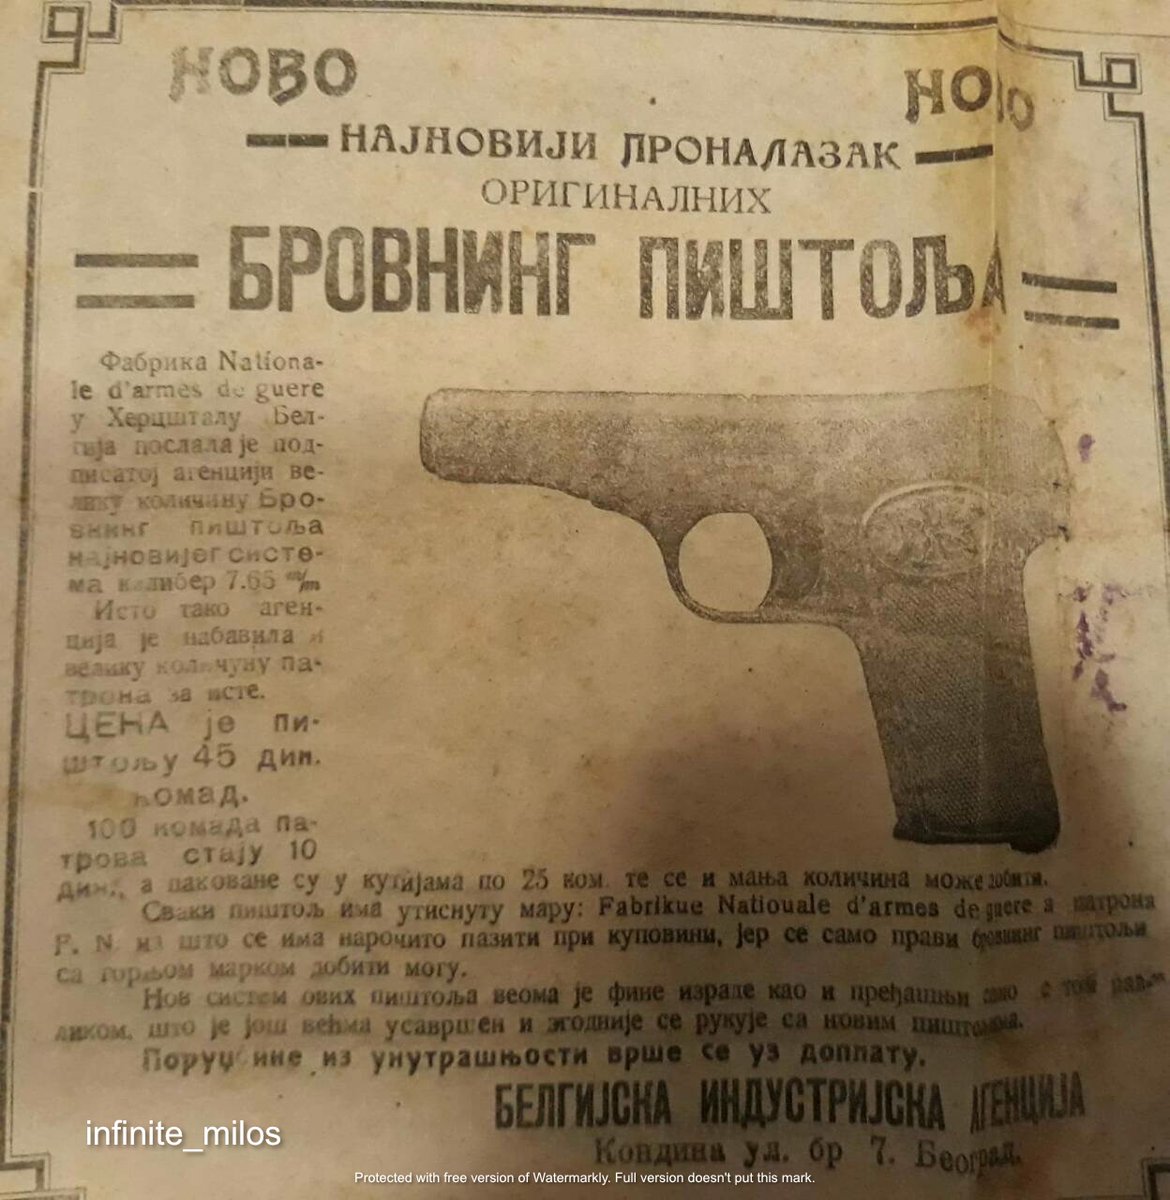 Apis believed that the Austria-Hungary was preparing an attack against Serbia and he thought that the attack against the heir of the Habsburg throne might revert these plans. The pistols were supplied by the Belgian arms dealer and swordsman living in Belgrade, Charles Doucet